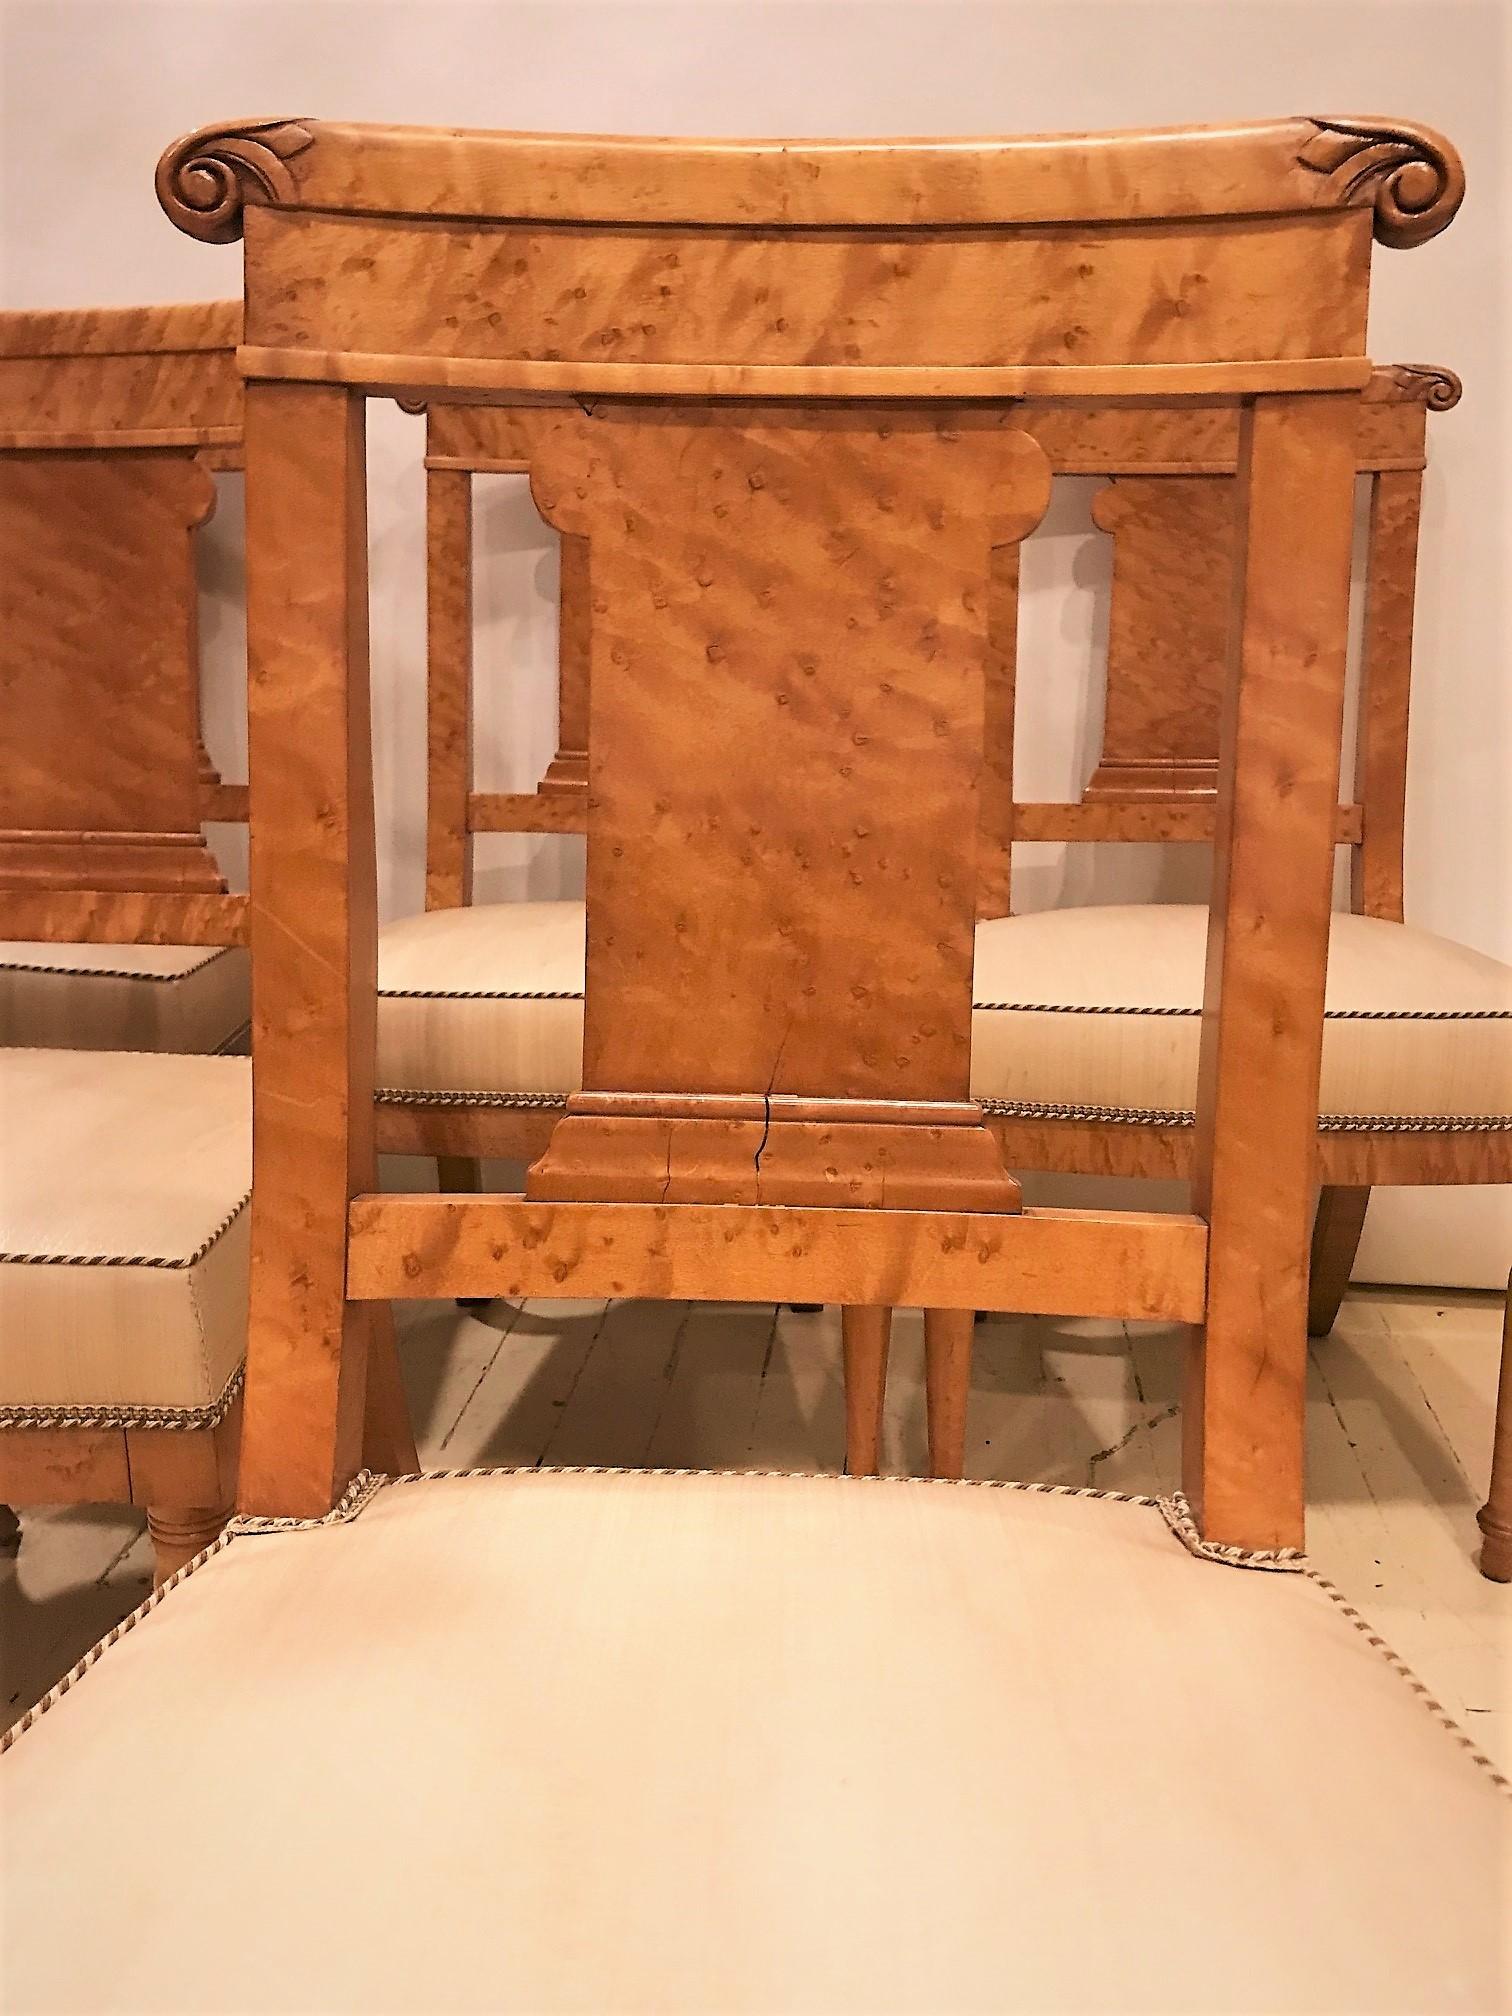 These beautiful dining chairs were at one time in the Paris estate of Eleanor Post Hutton (Close), the daughter of Marjorie Merriweather Post of Post cereal fame. They have long been prized by owners with the means and taste to furnish their homes